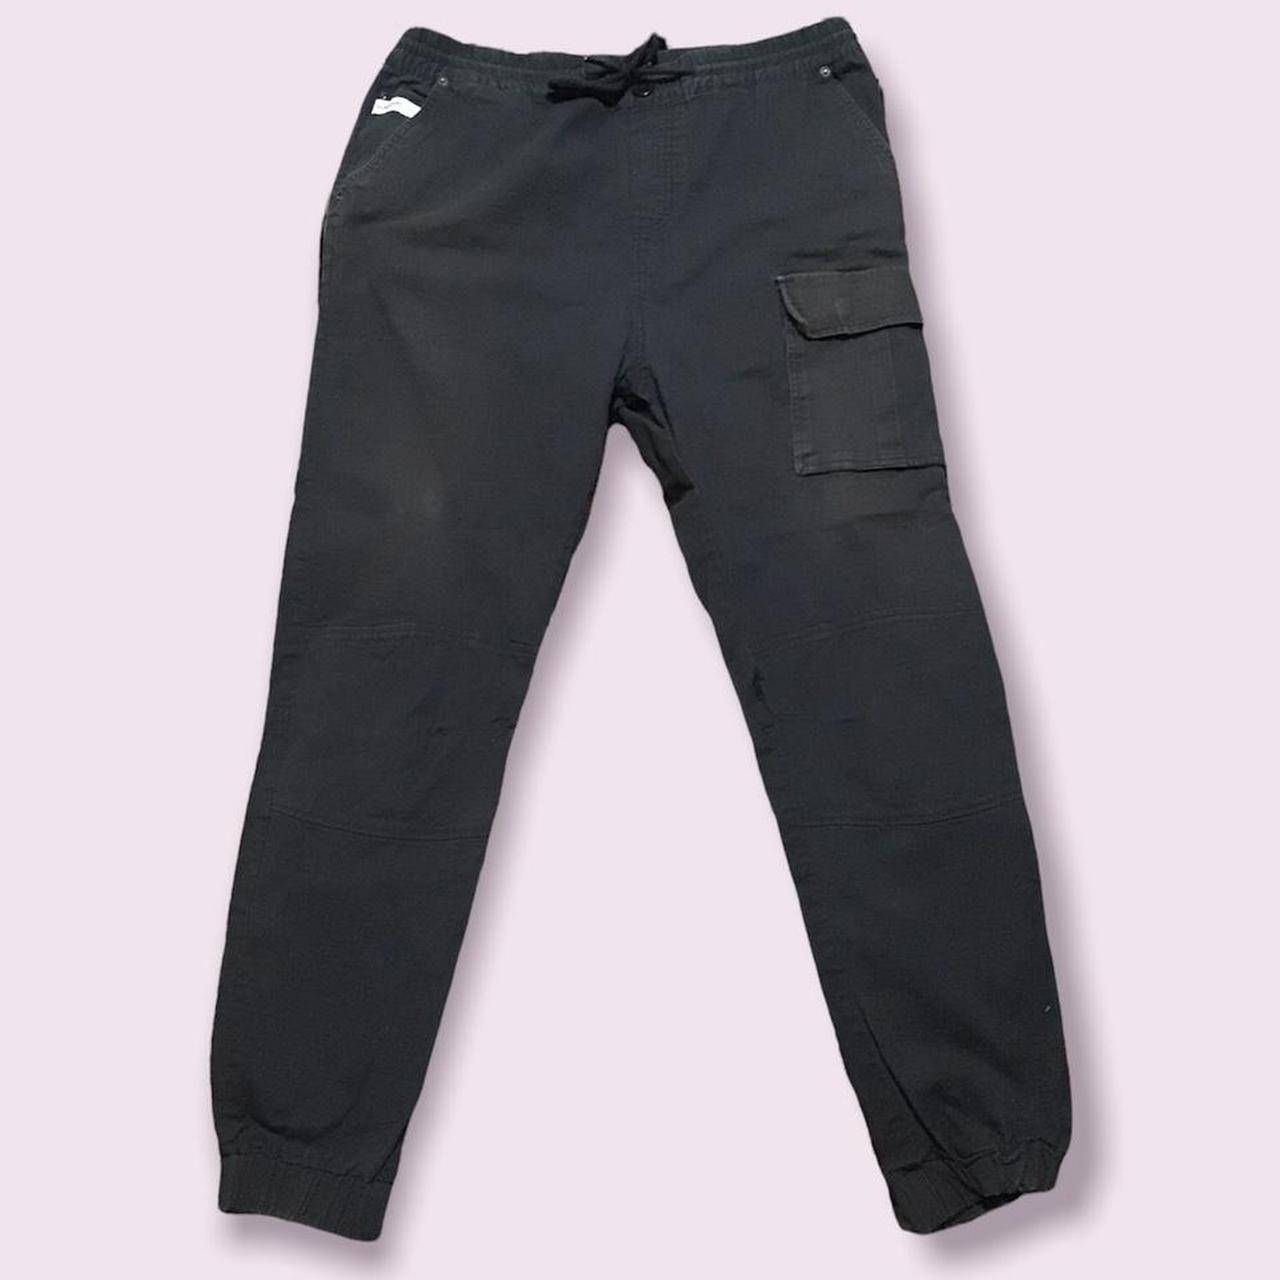 Black jogger cargo pants. The inseam is 28 inches - Depop